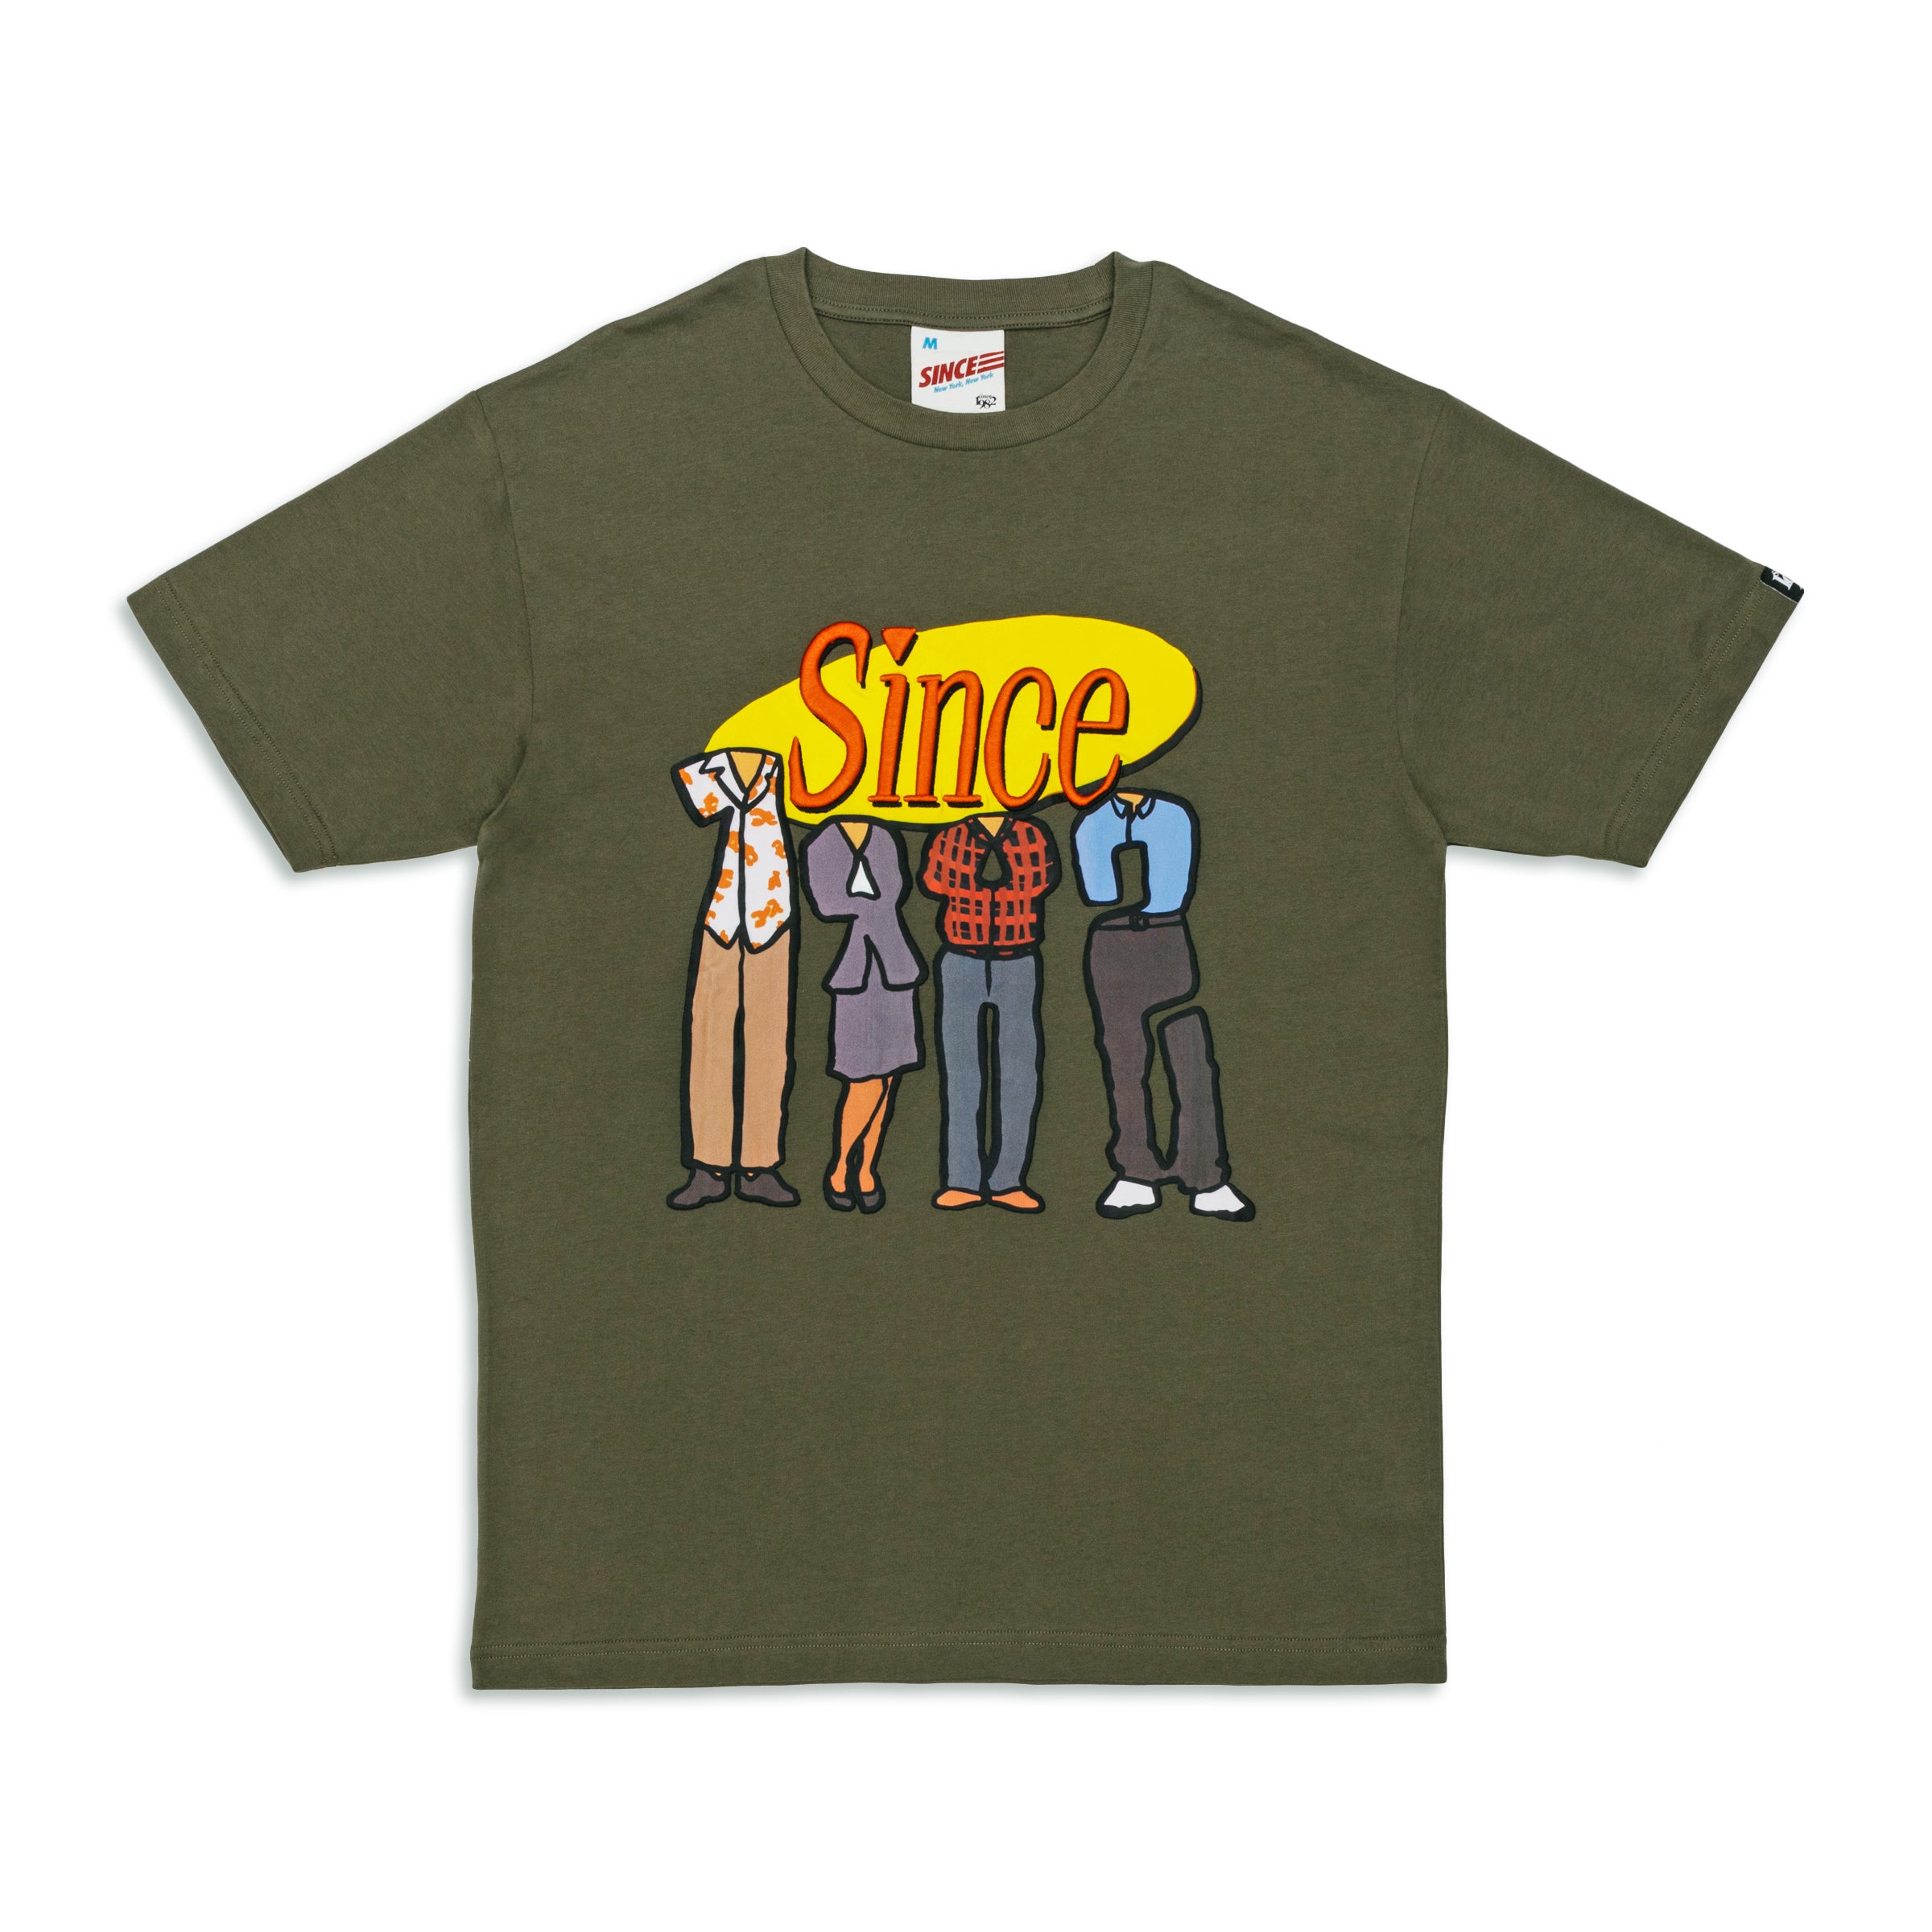 Olive Tee Shirt About Nothing.